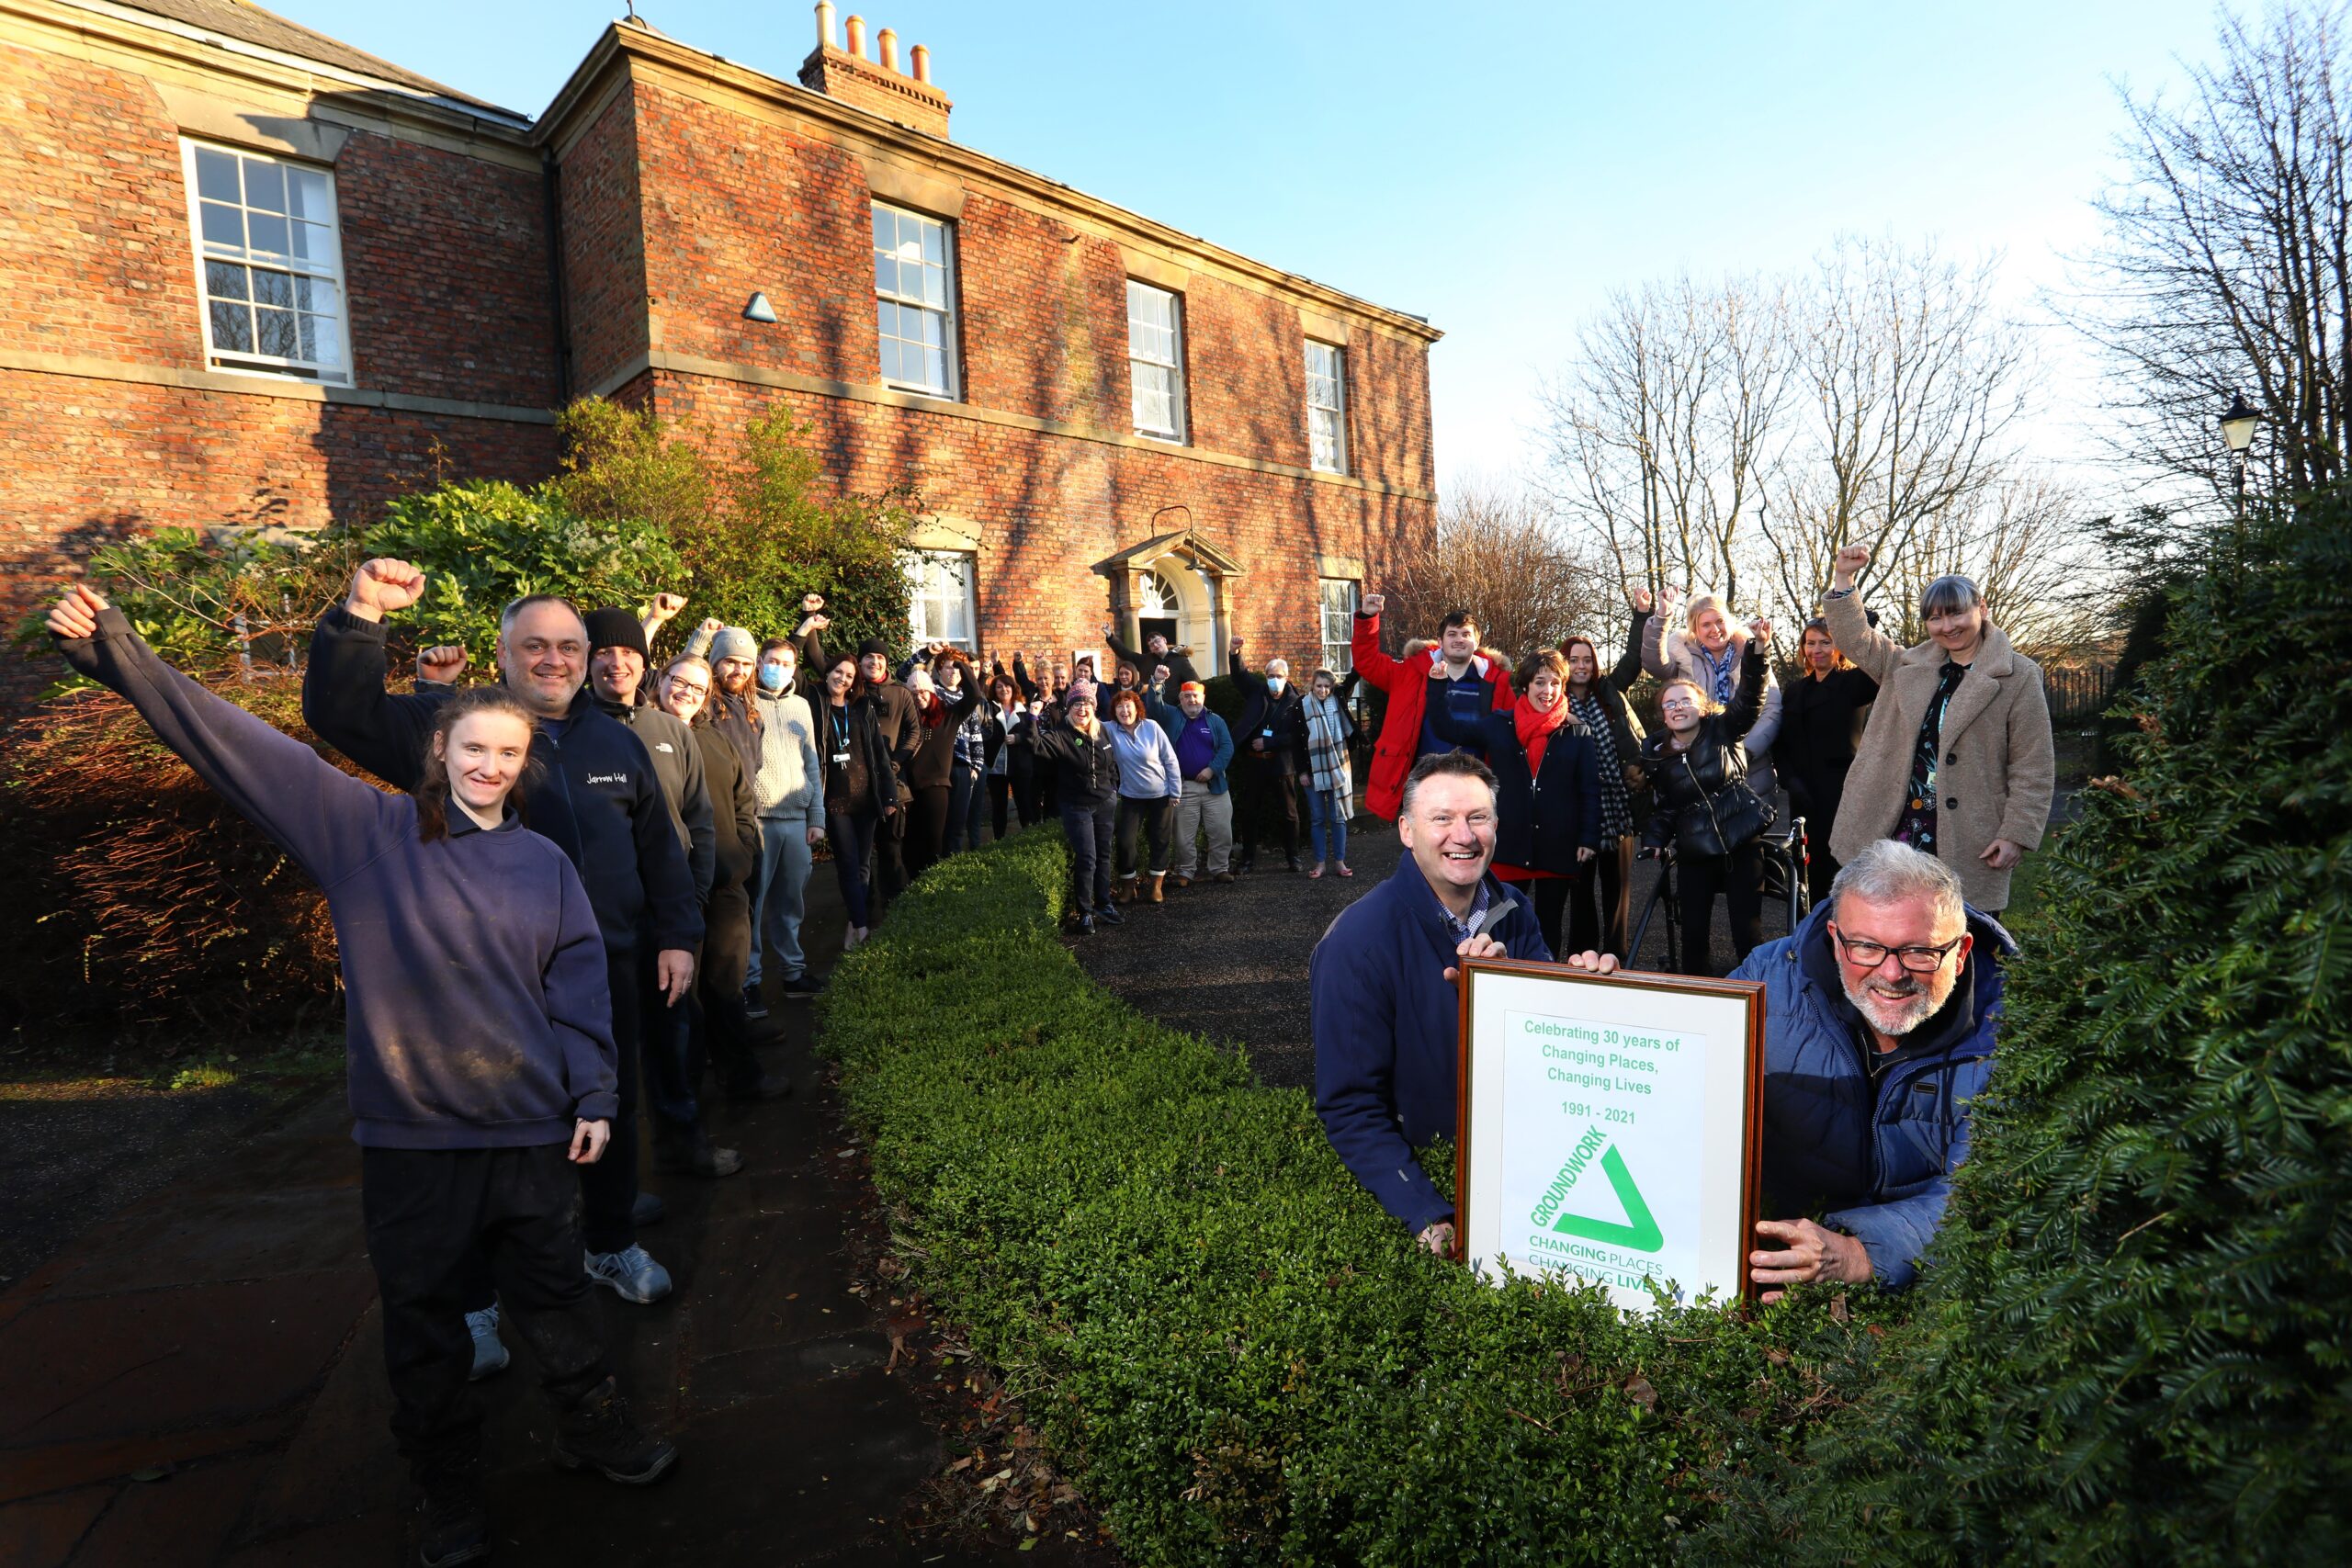 Environment and regeneration charity Groundwork is celebrating 30 years of success operating in South Tyneside